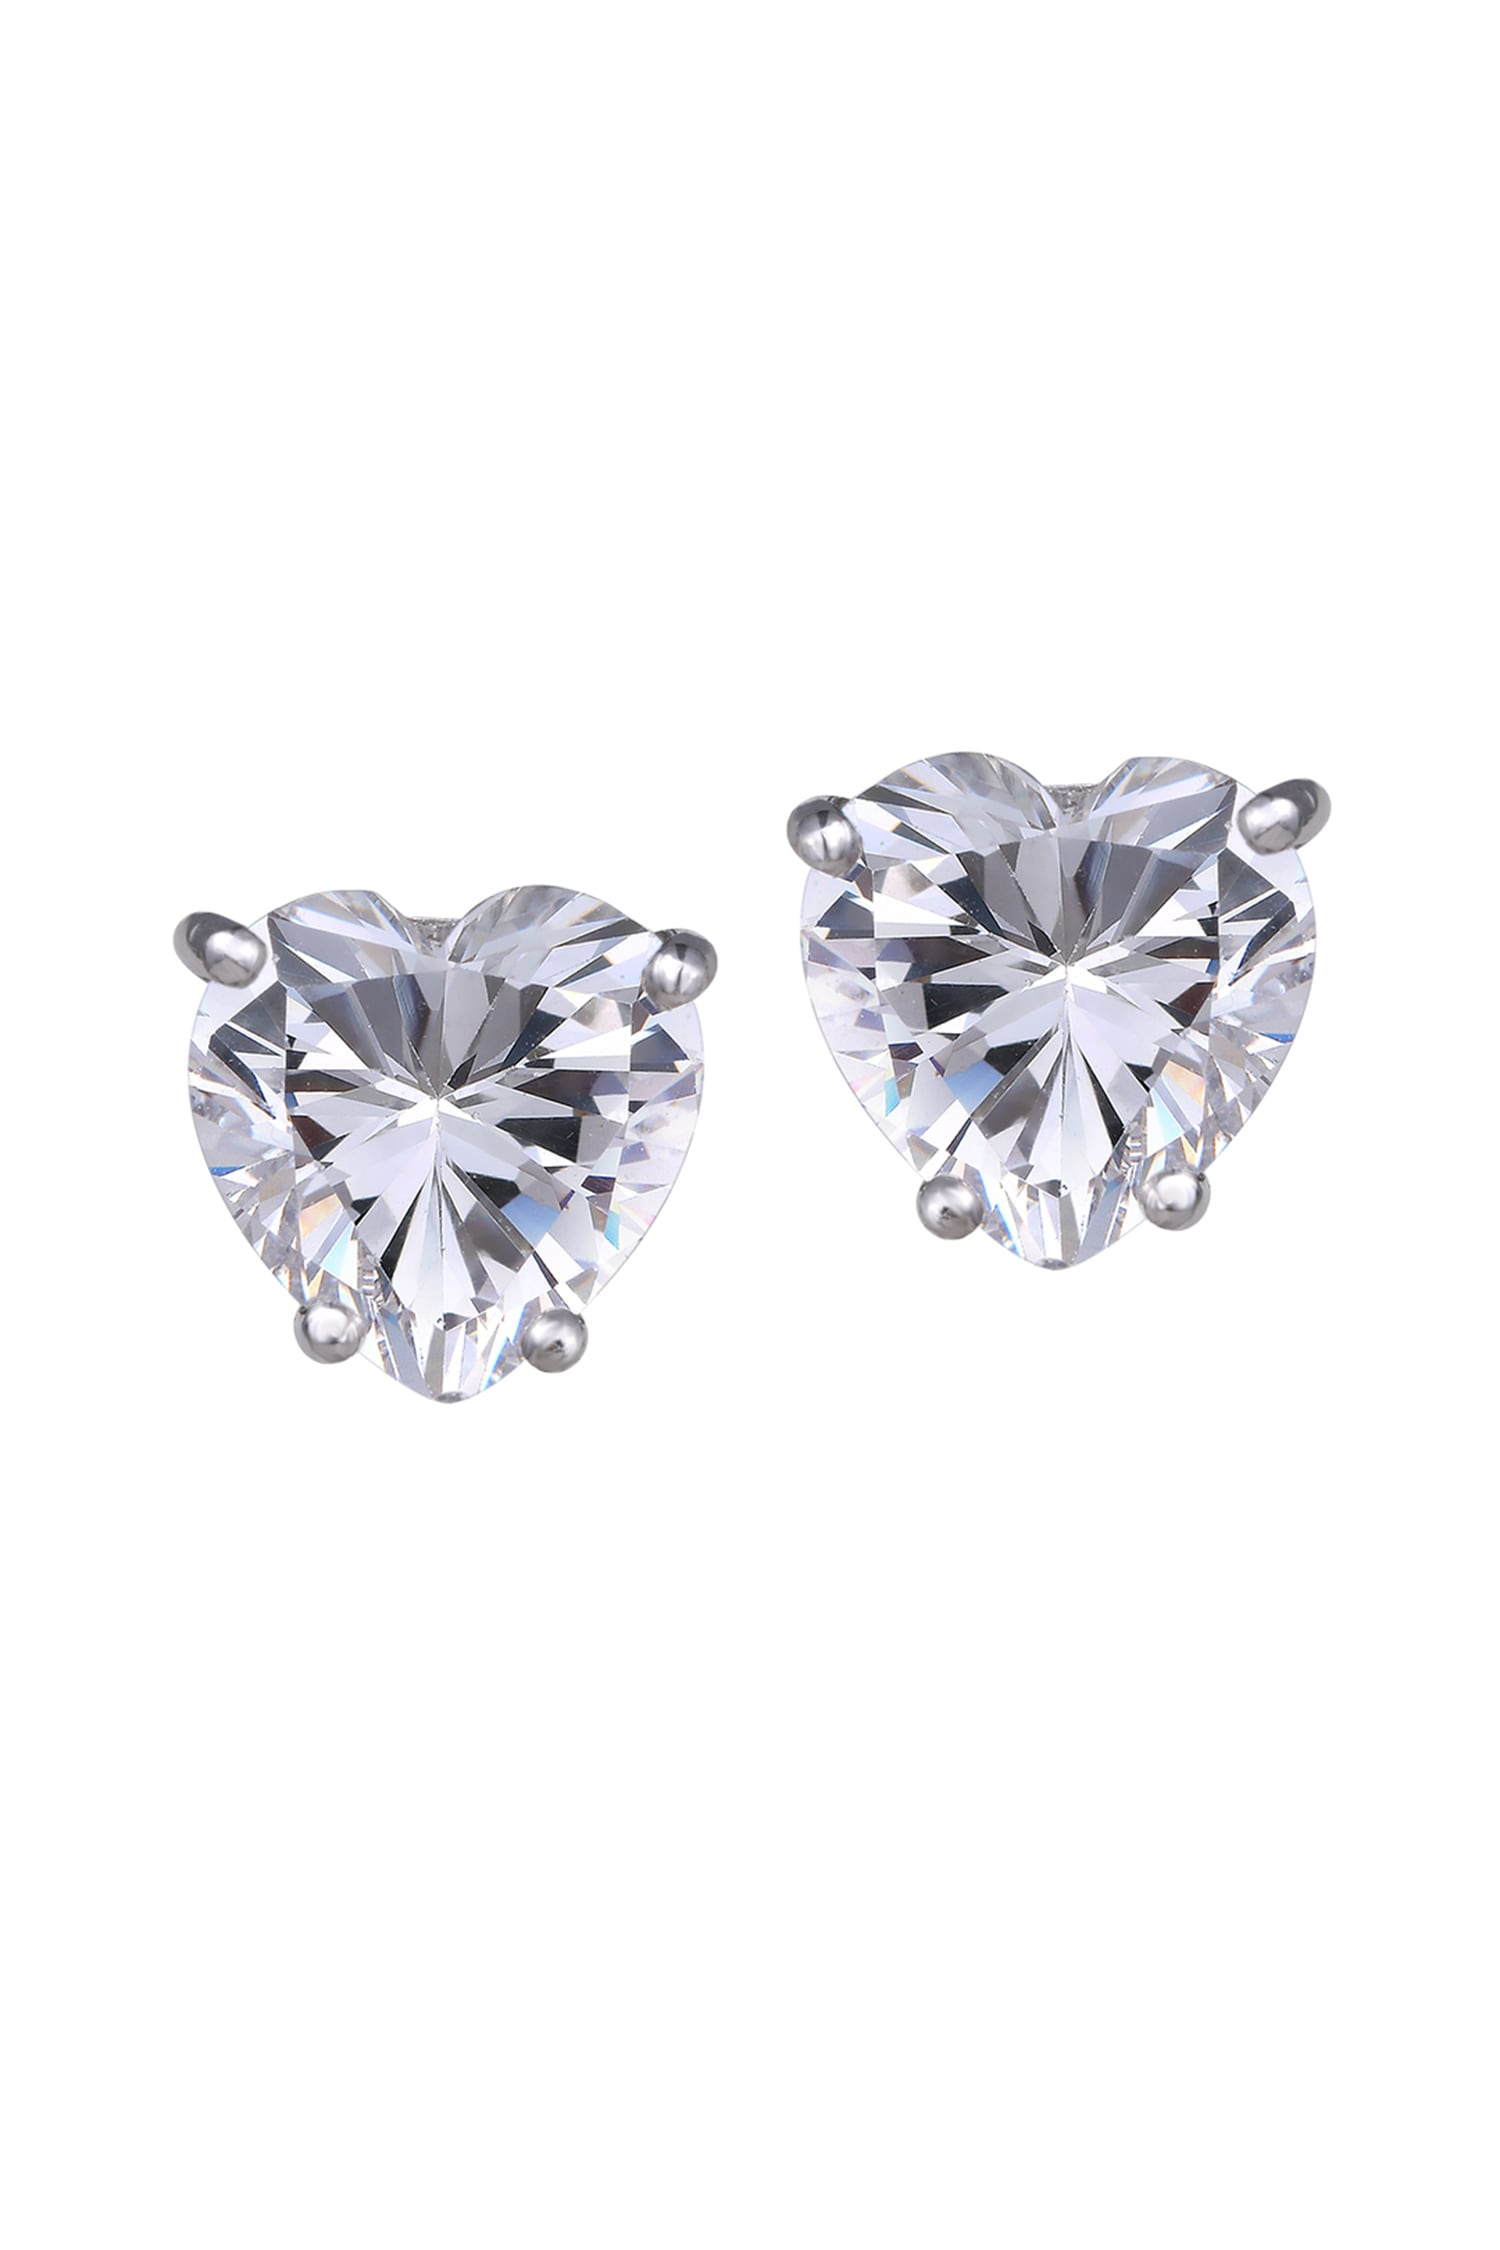 Buy Heart Shaped Stud Earrings by DIOSA PARIS JEWELLERY at Aza Fashions